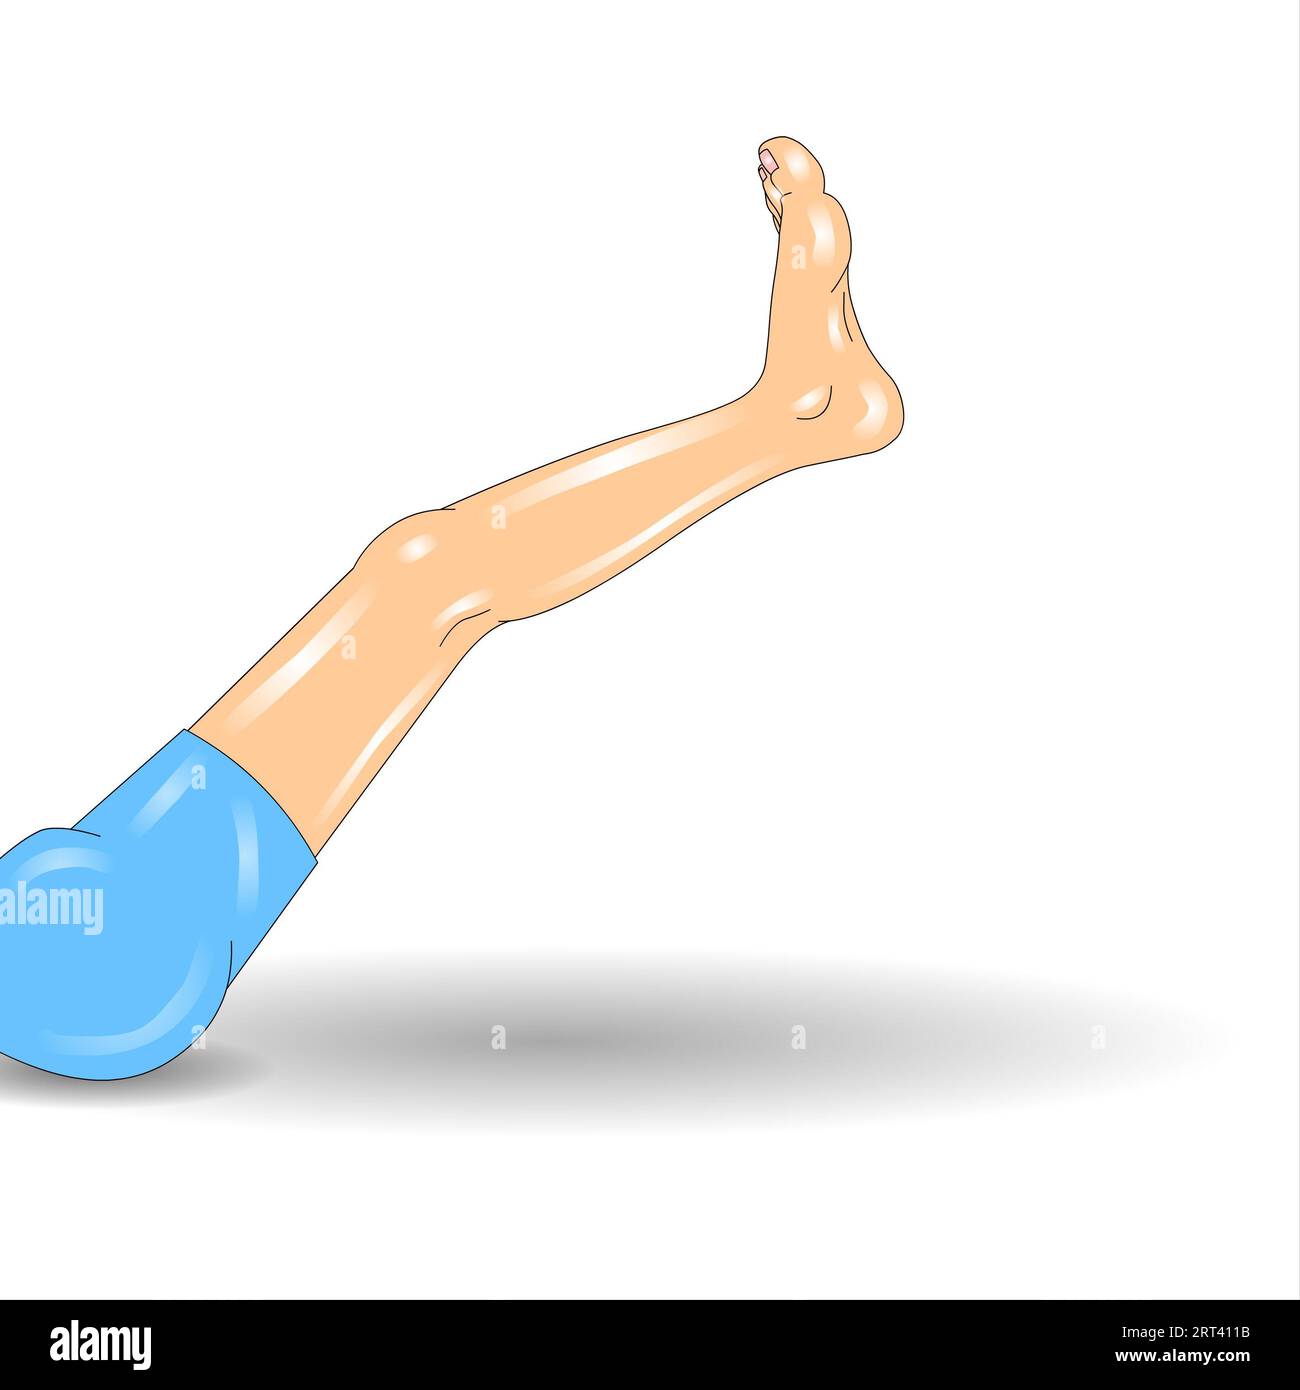 Vector illustration of a male leg on a white background with shadow. Stock Photo